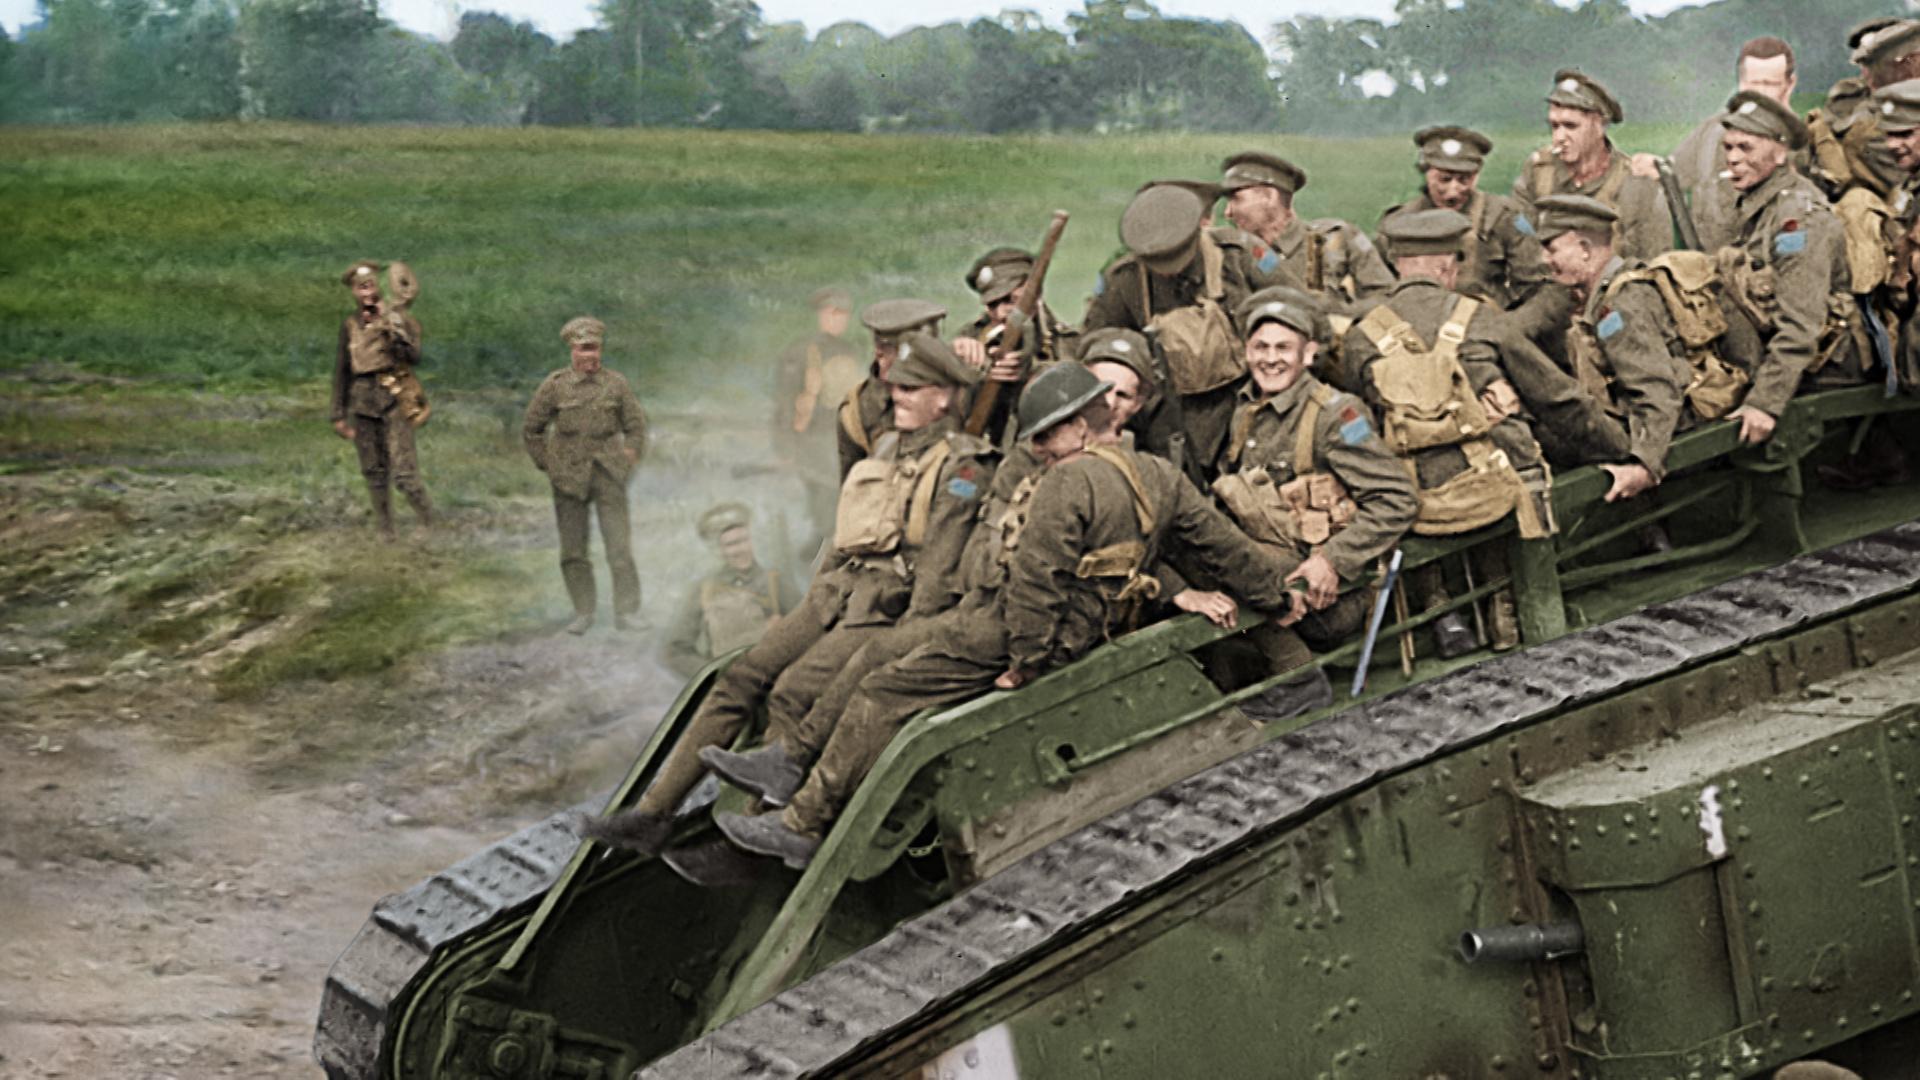 They Shall Not Grow Old - Per sempre giovani recensione documentario di Peter Jackson